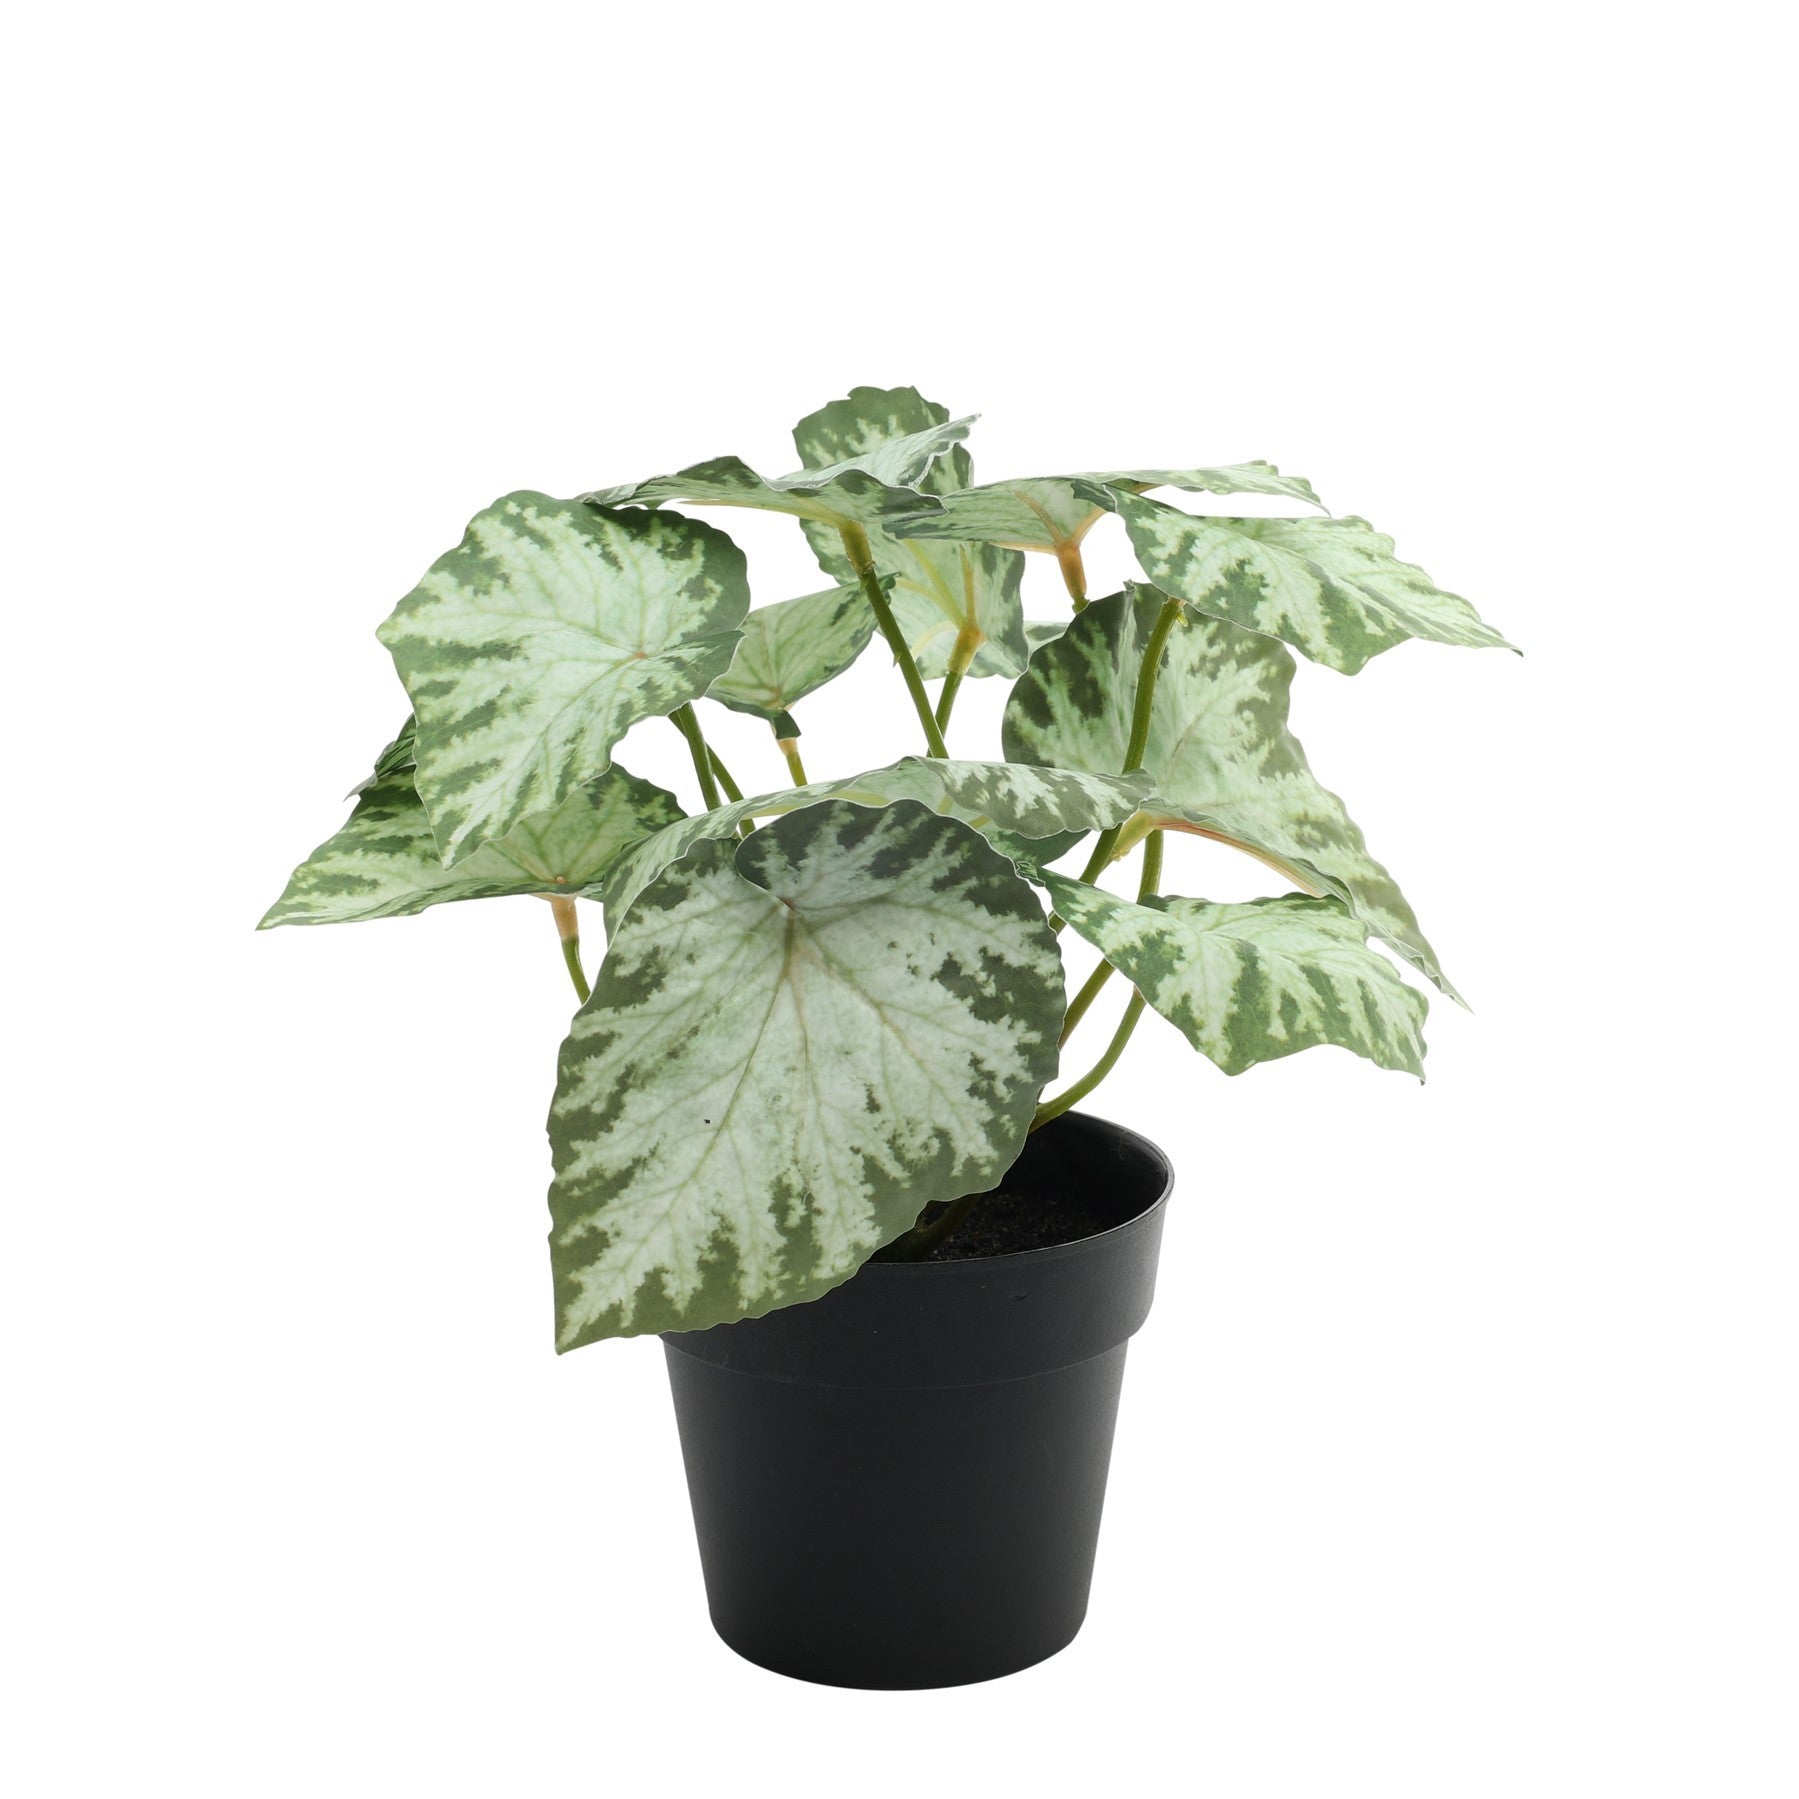 View Lighted Leafed Begonia Potted House Plant 22cm information